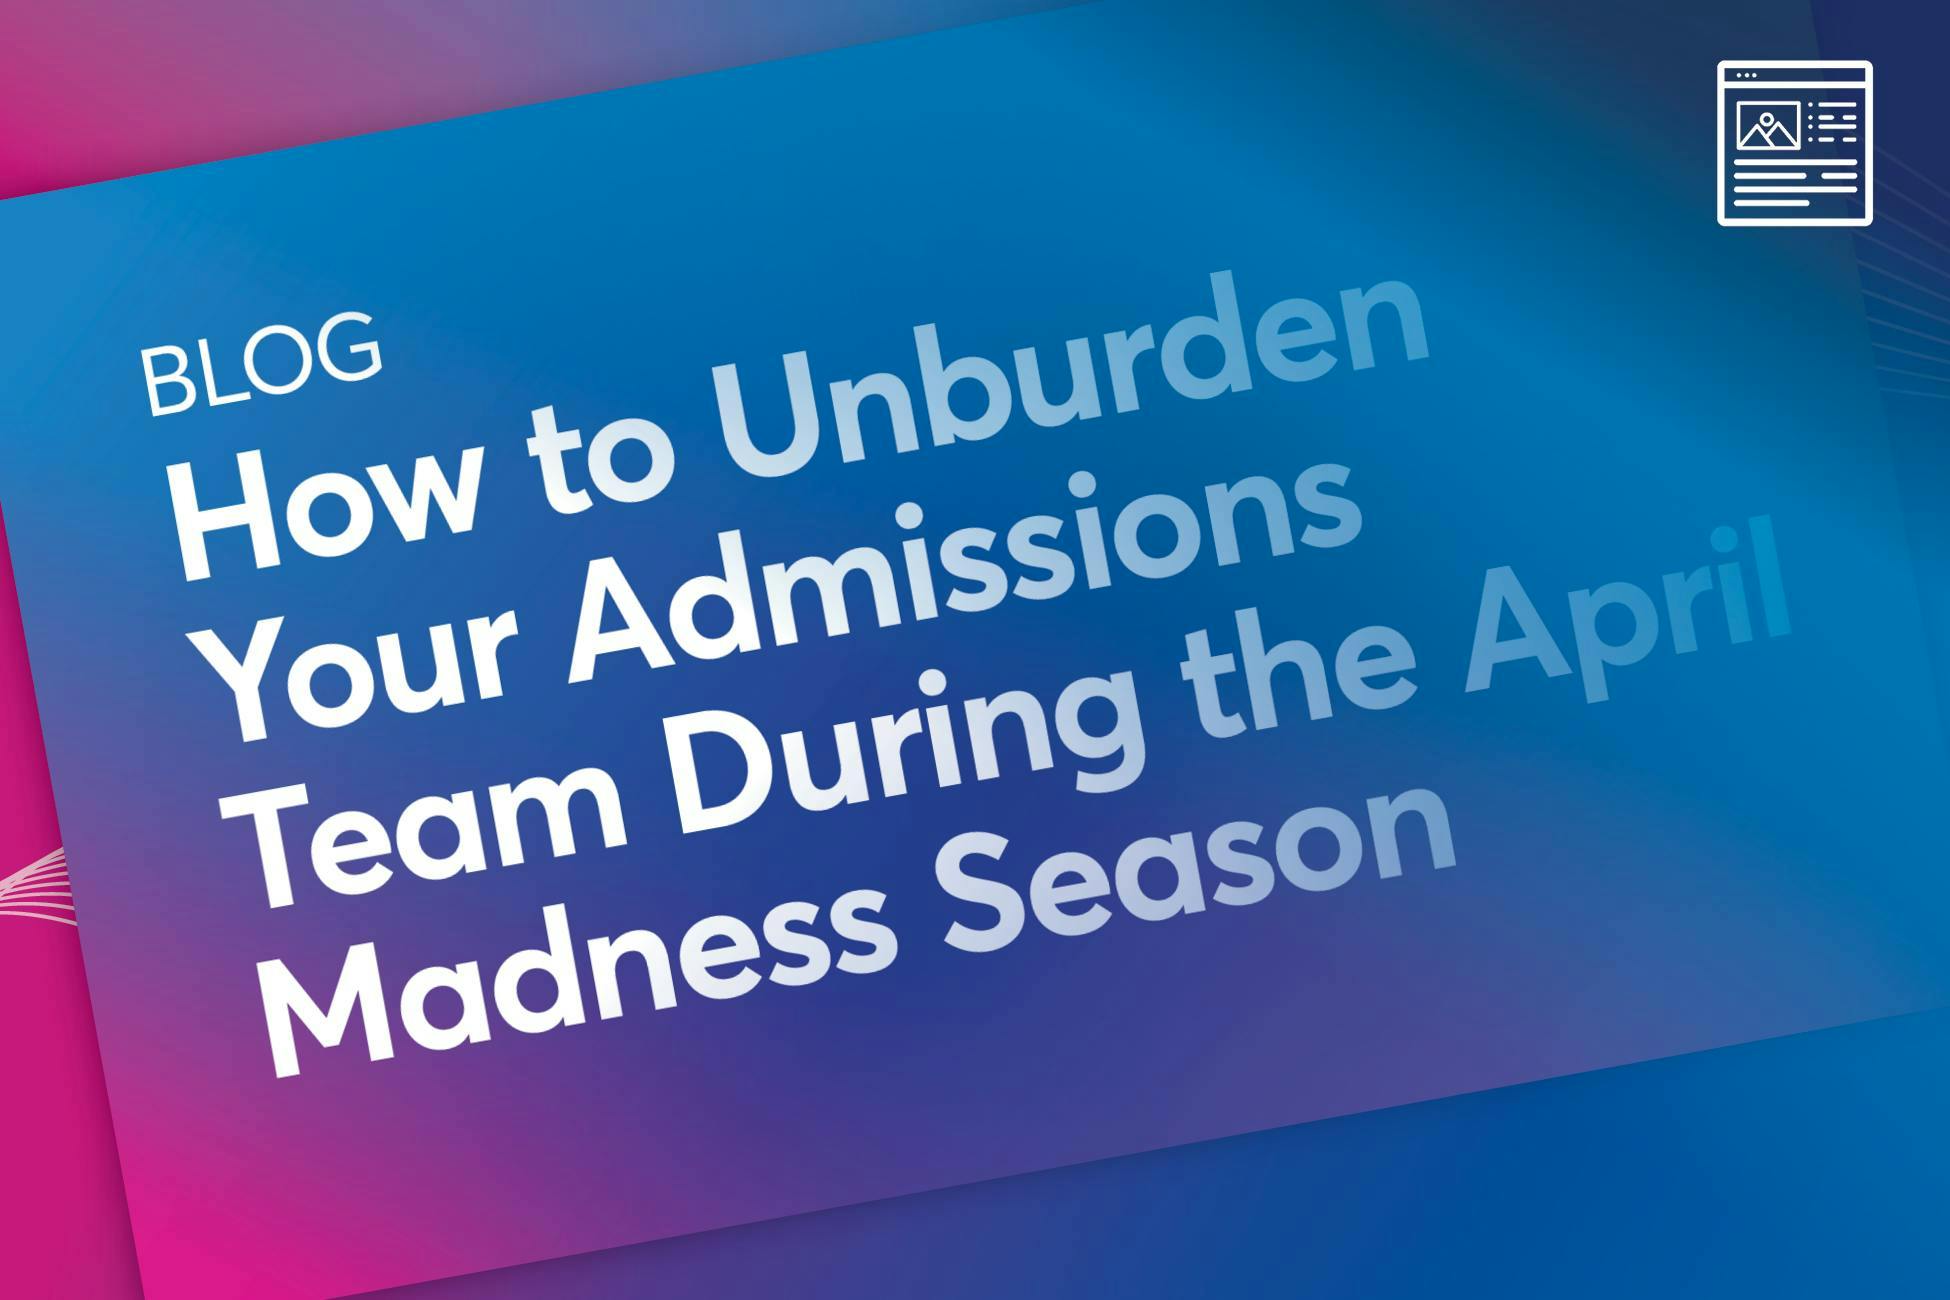 Blog: How to Unburden Your Admissions Team During the April Madness Season